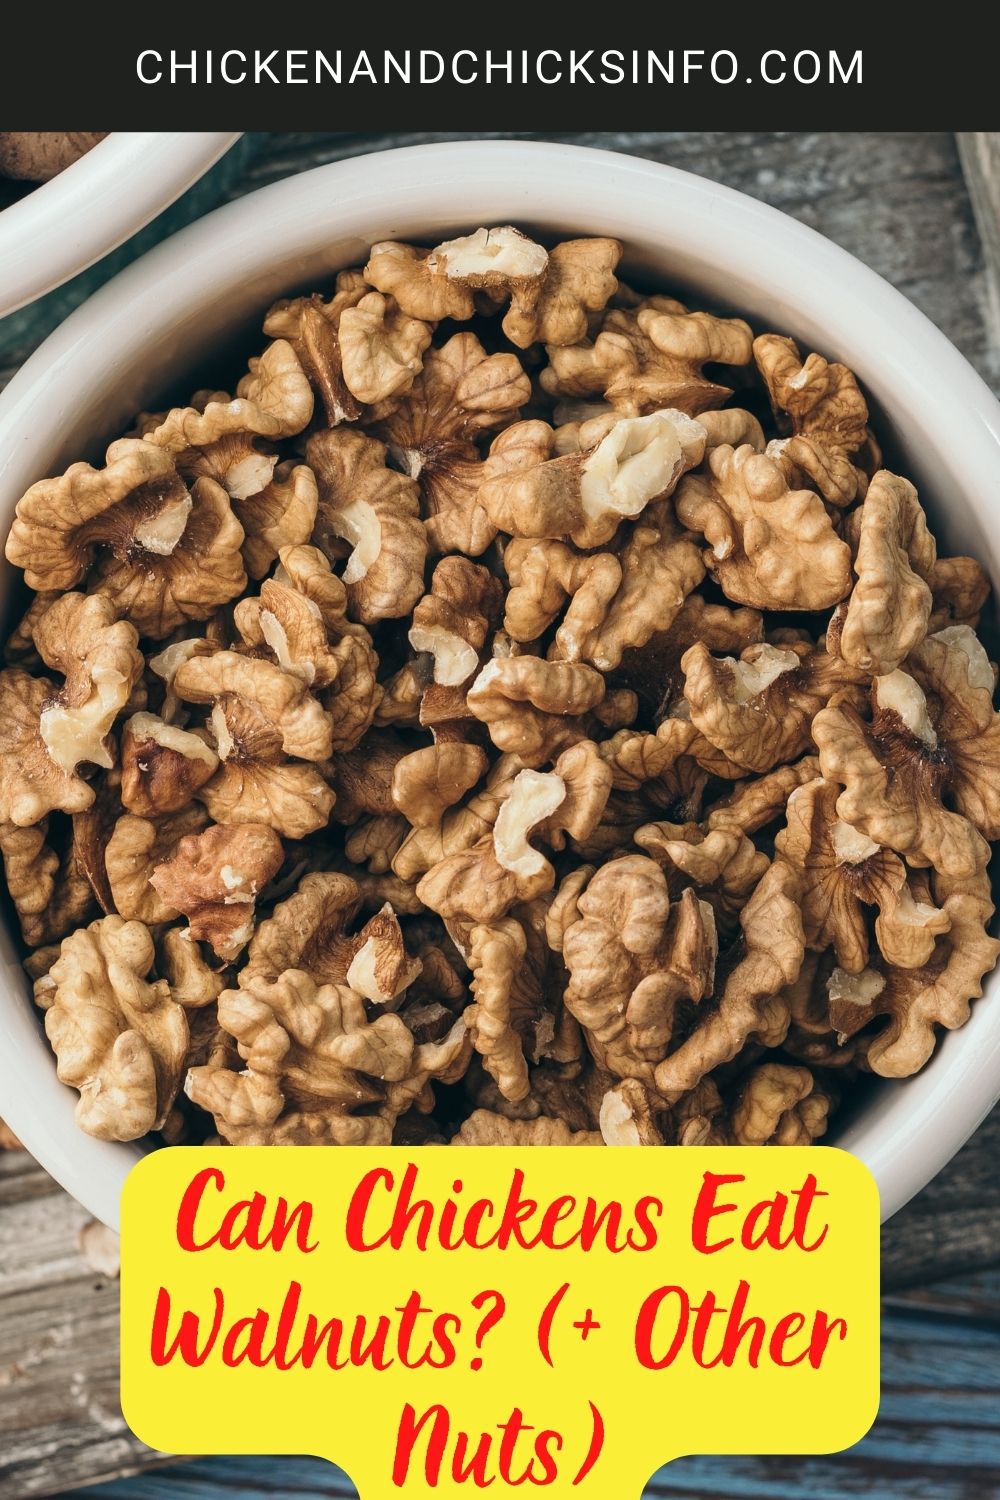 Can Chickens Eat Walnuts? (+ Other Nuts) poster.
